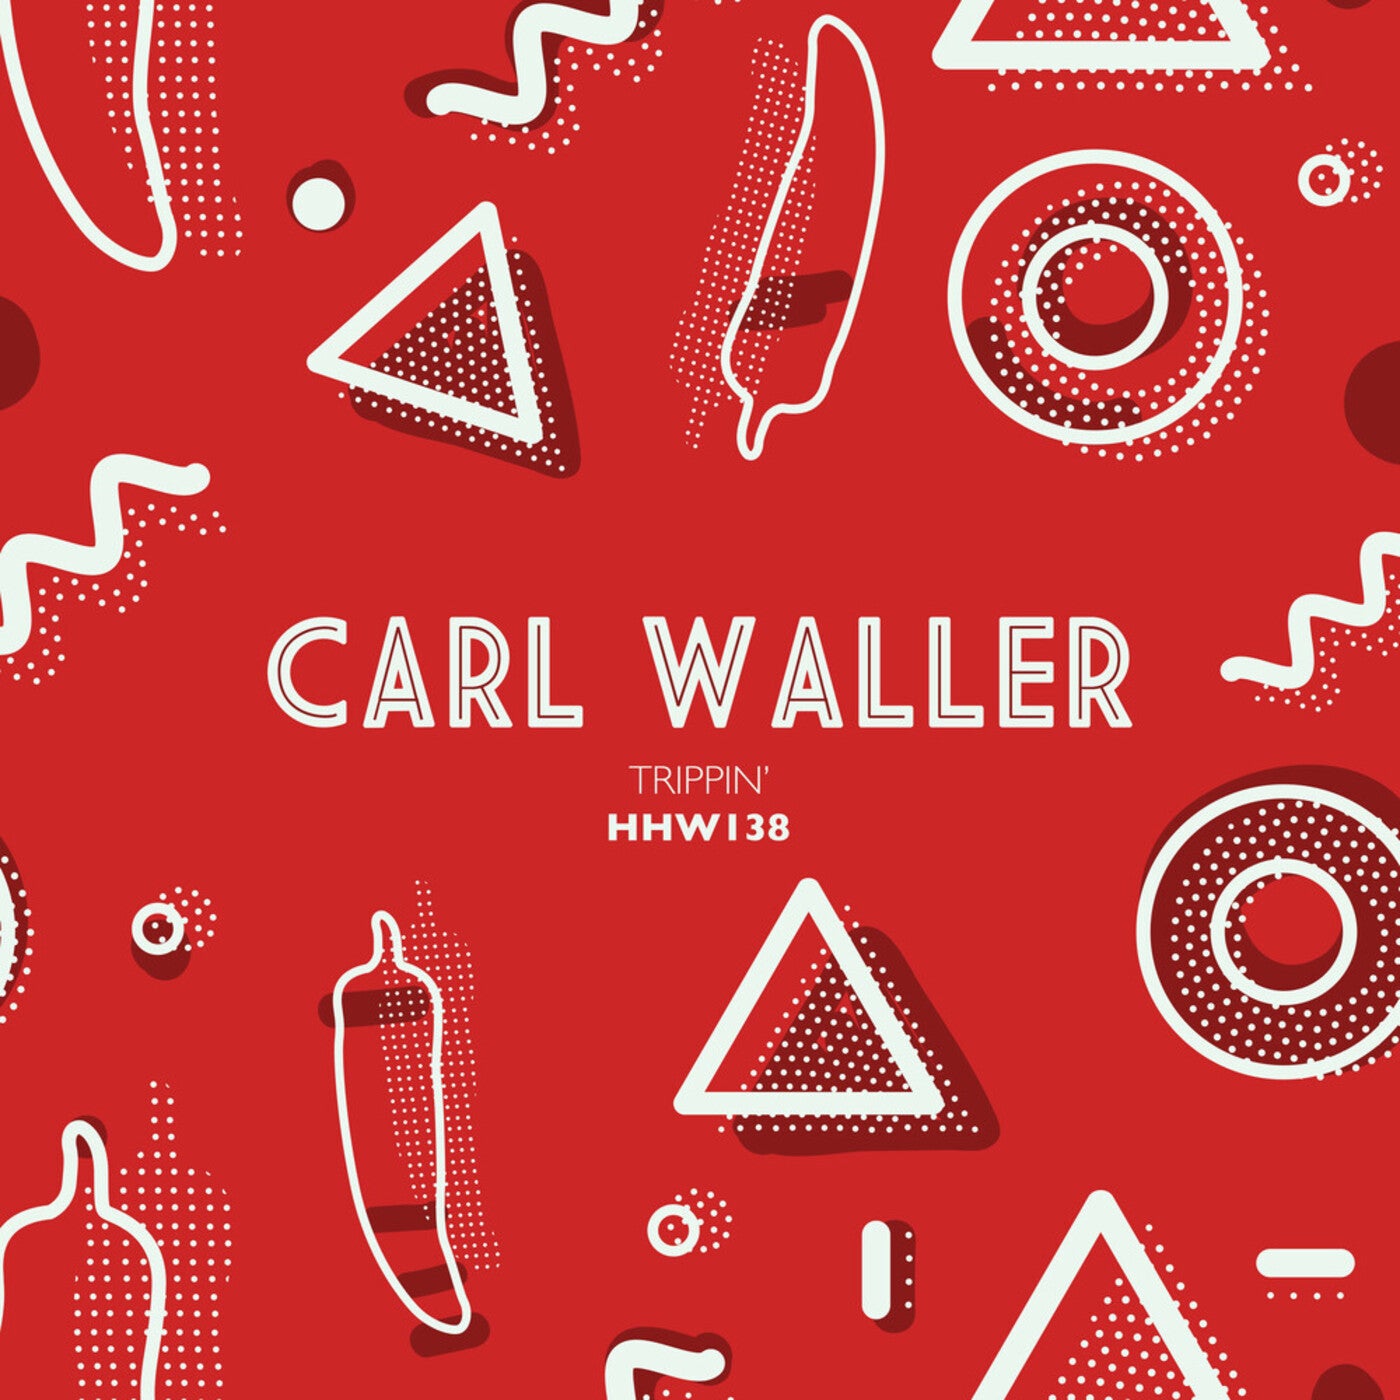 Carl Waller Trippin Extended Mix Hungarian Hot Wax Music And Downloads On Beatport